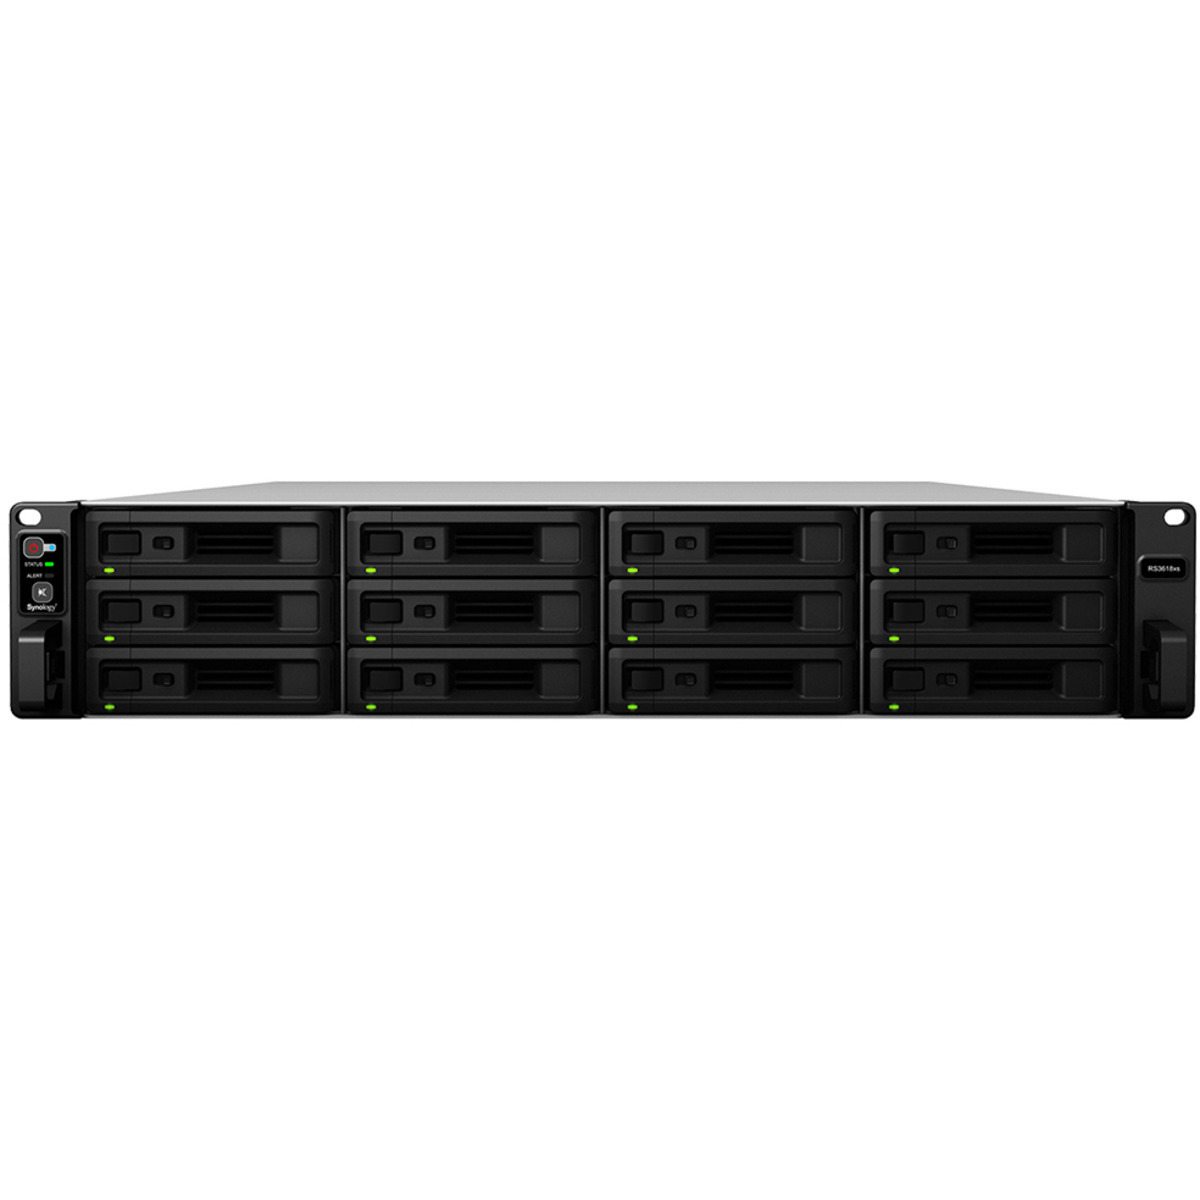 Synology RackStation RS3618xs 132tb 12-Bay RackMount Large Business / Enterprise NAS - Network Attached Storage Device 11x12tb Seagate IronWolf Pro ST12000NT001 3.5 7200rpm SATA 6Gb/s HDD NAS Class Drives Installed - Burn-In Tested - ON SALE RackStation RS3618xs